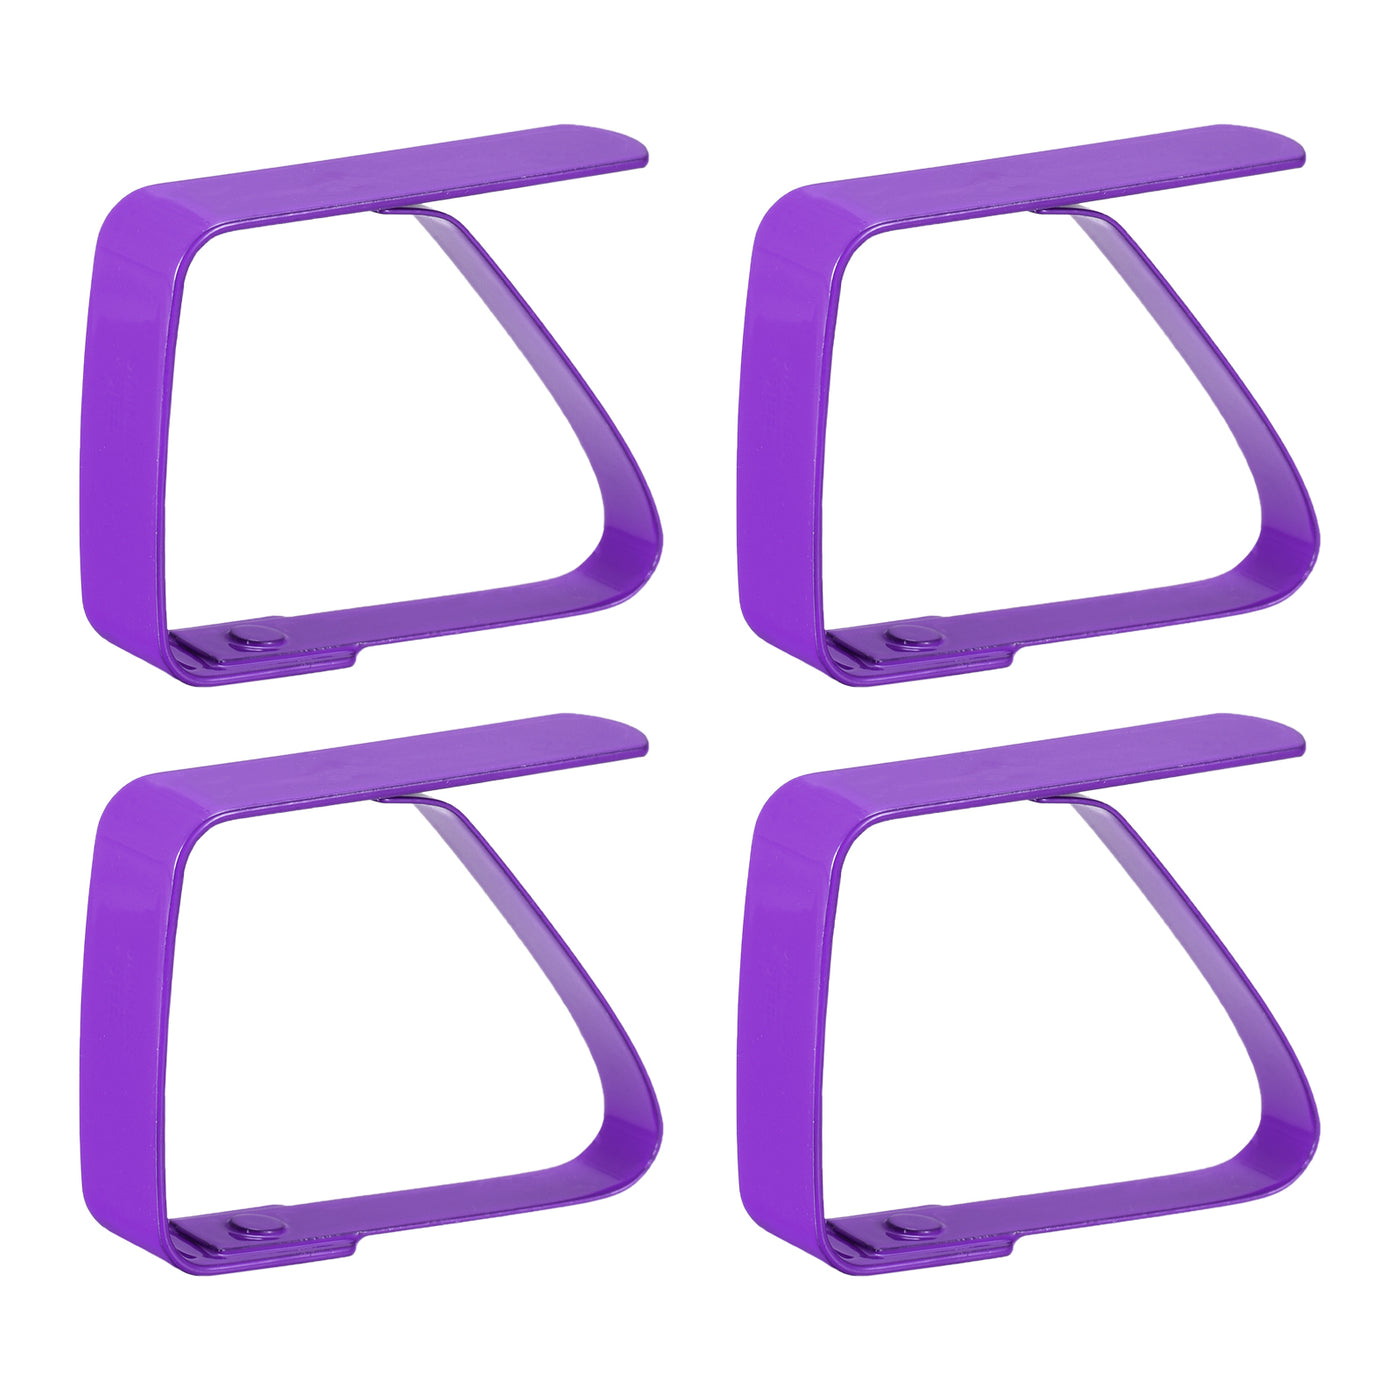 uxcell Uxcell Tablecloth Clips 50mm x 40mm 420 Stainless Steel Table Cloth Holder Purple 4 Pcs